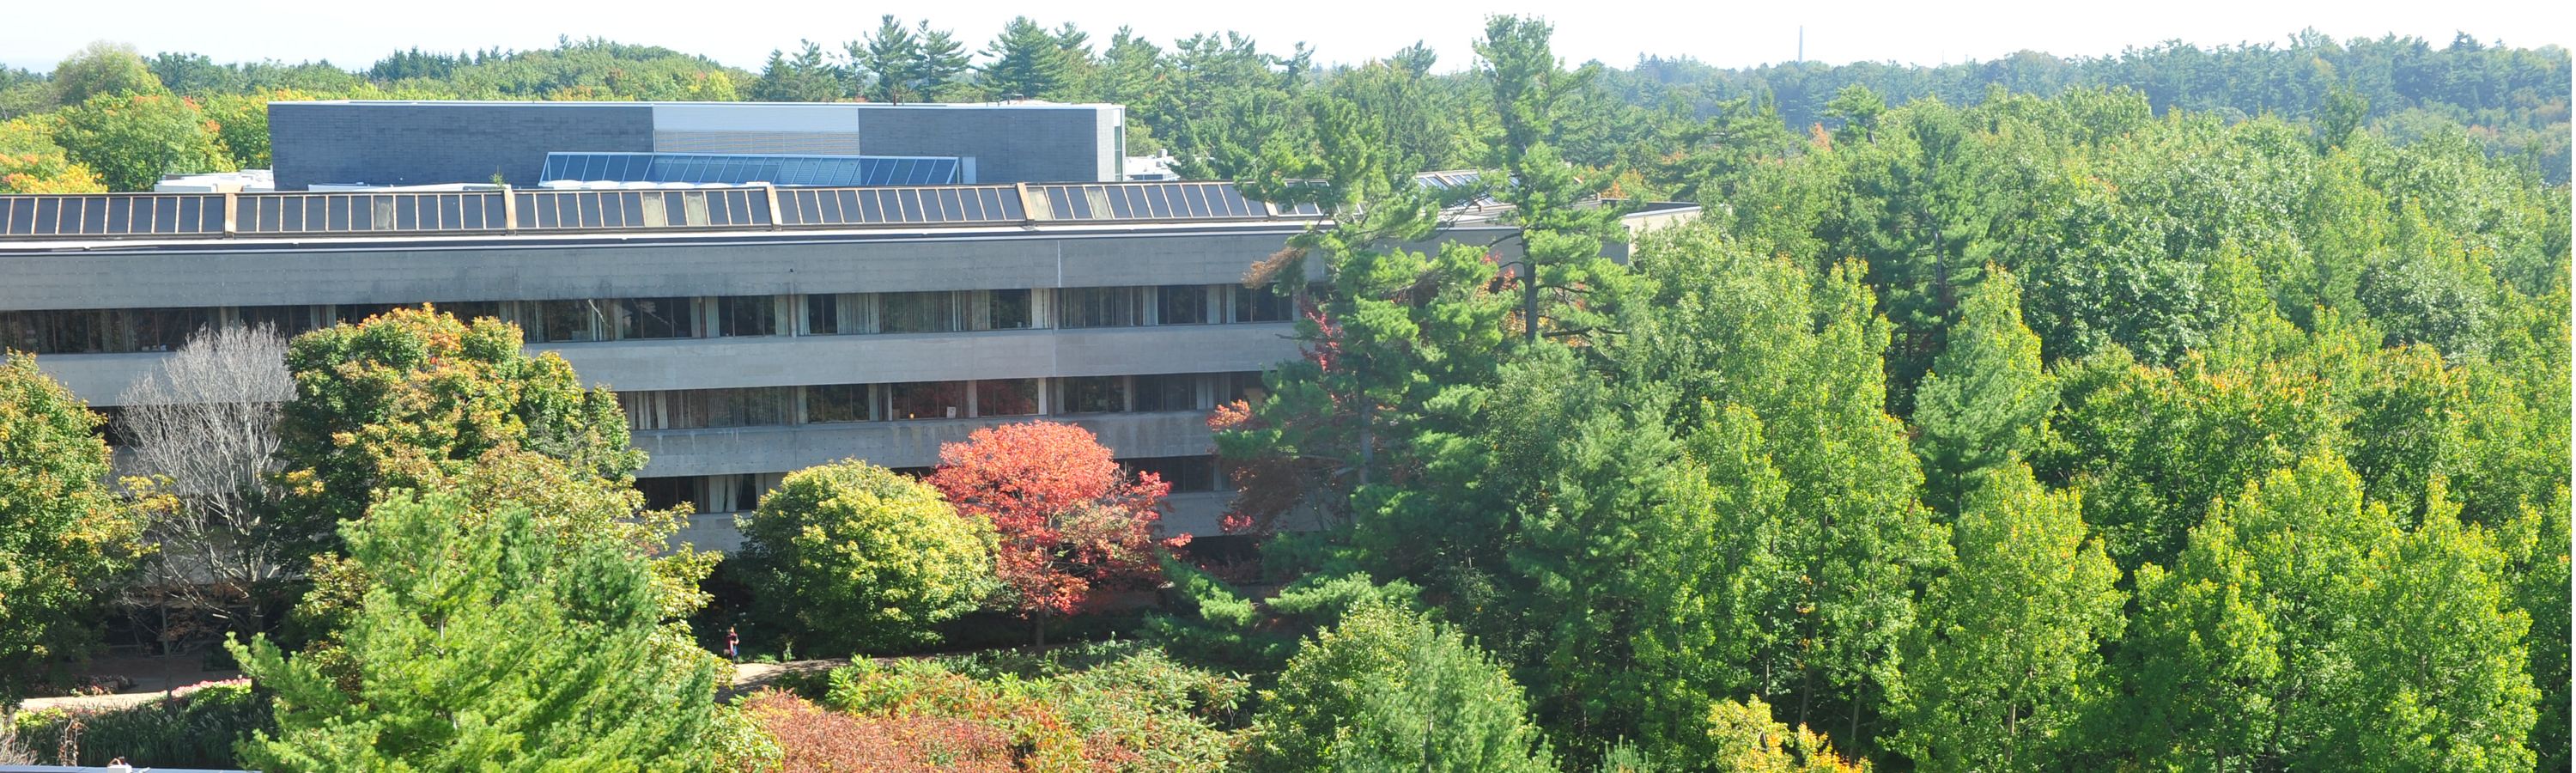 A long-distance photo of Humanities Wing and the forest beside it